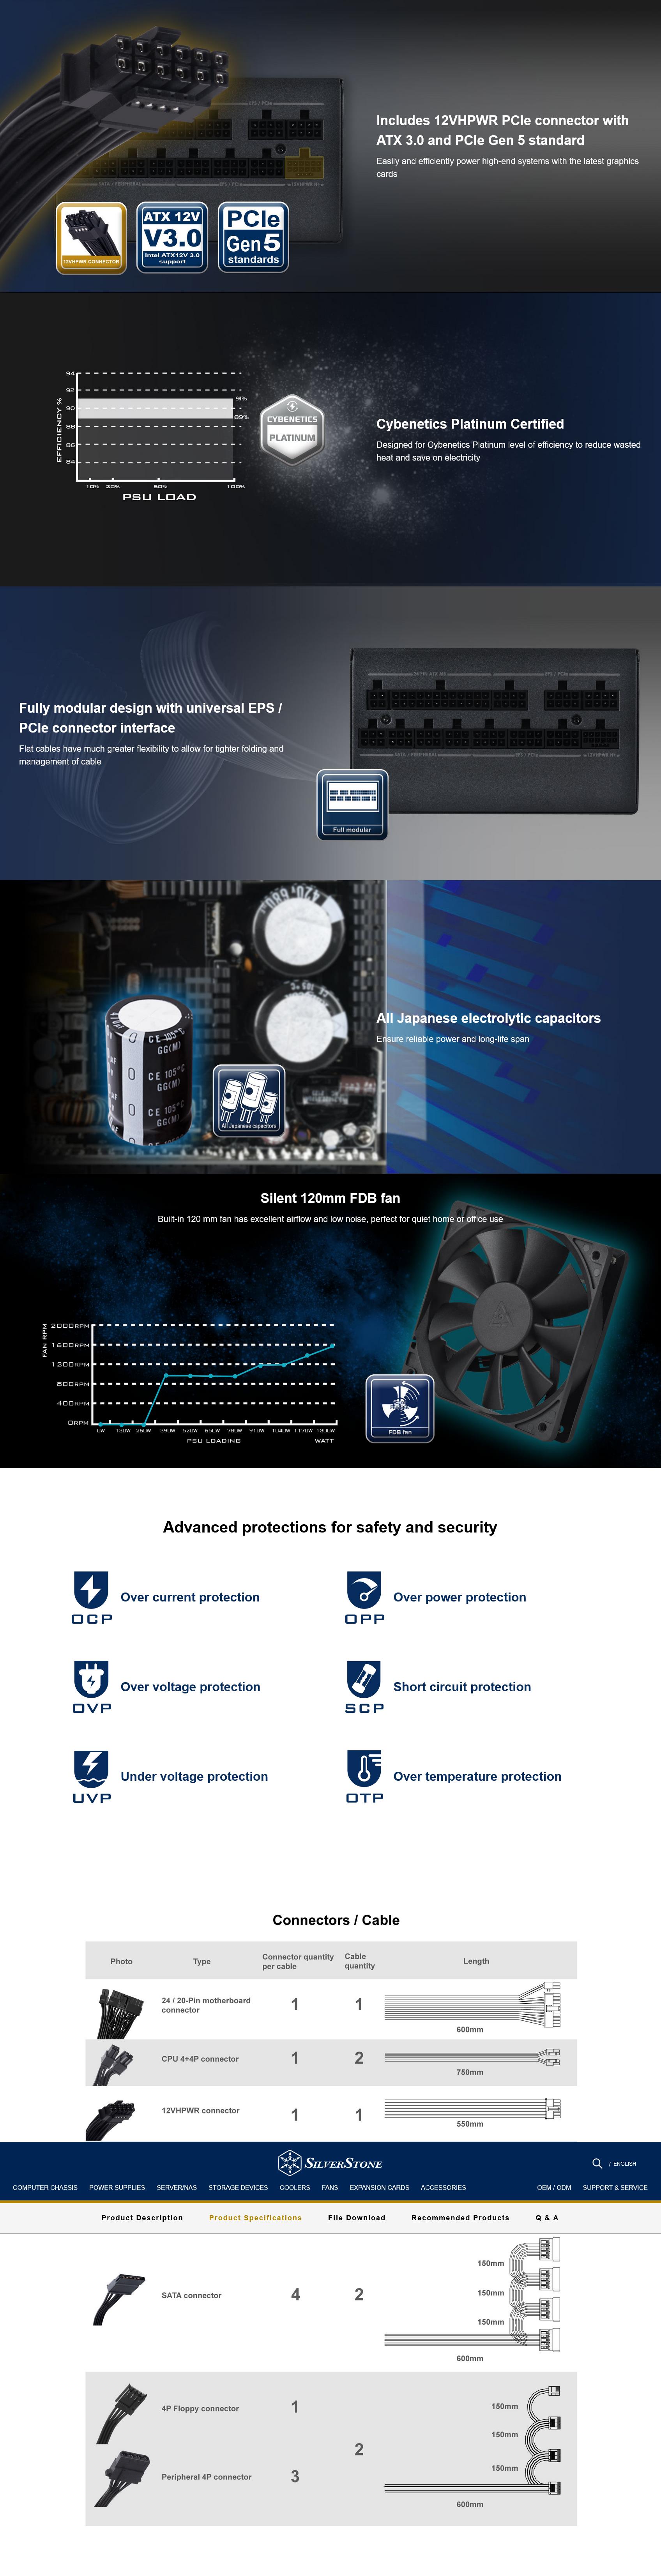 A large marketing image providing additional information about the product SilverStone HELA 1300R 1300W Platinum PCIe 5.0 ATX Modular PSU - Additional alt info not provided